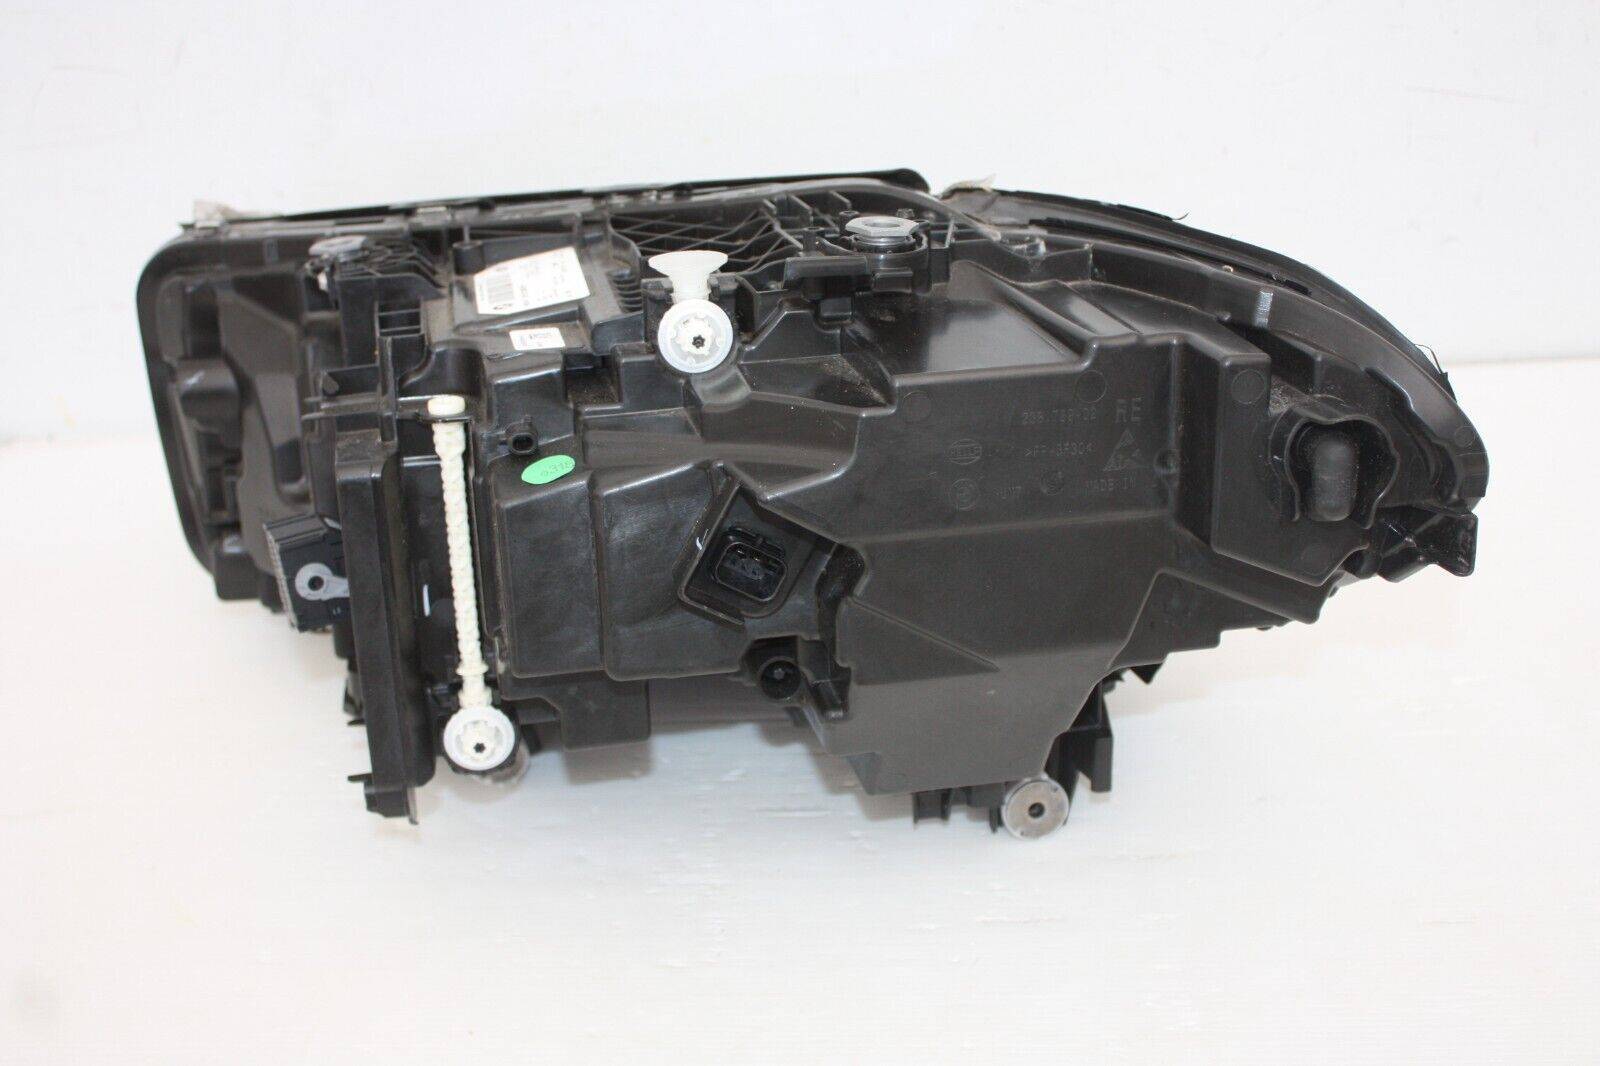 BMW-X5-X6-G05-G06-Right-Side-LED-Headlight-5A388C6-02-SEE-PICS-AS-ITS-DAMAGED-175444559307-9